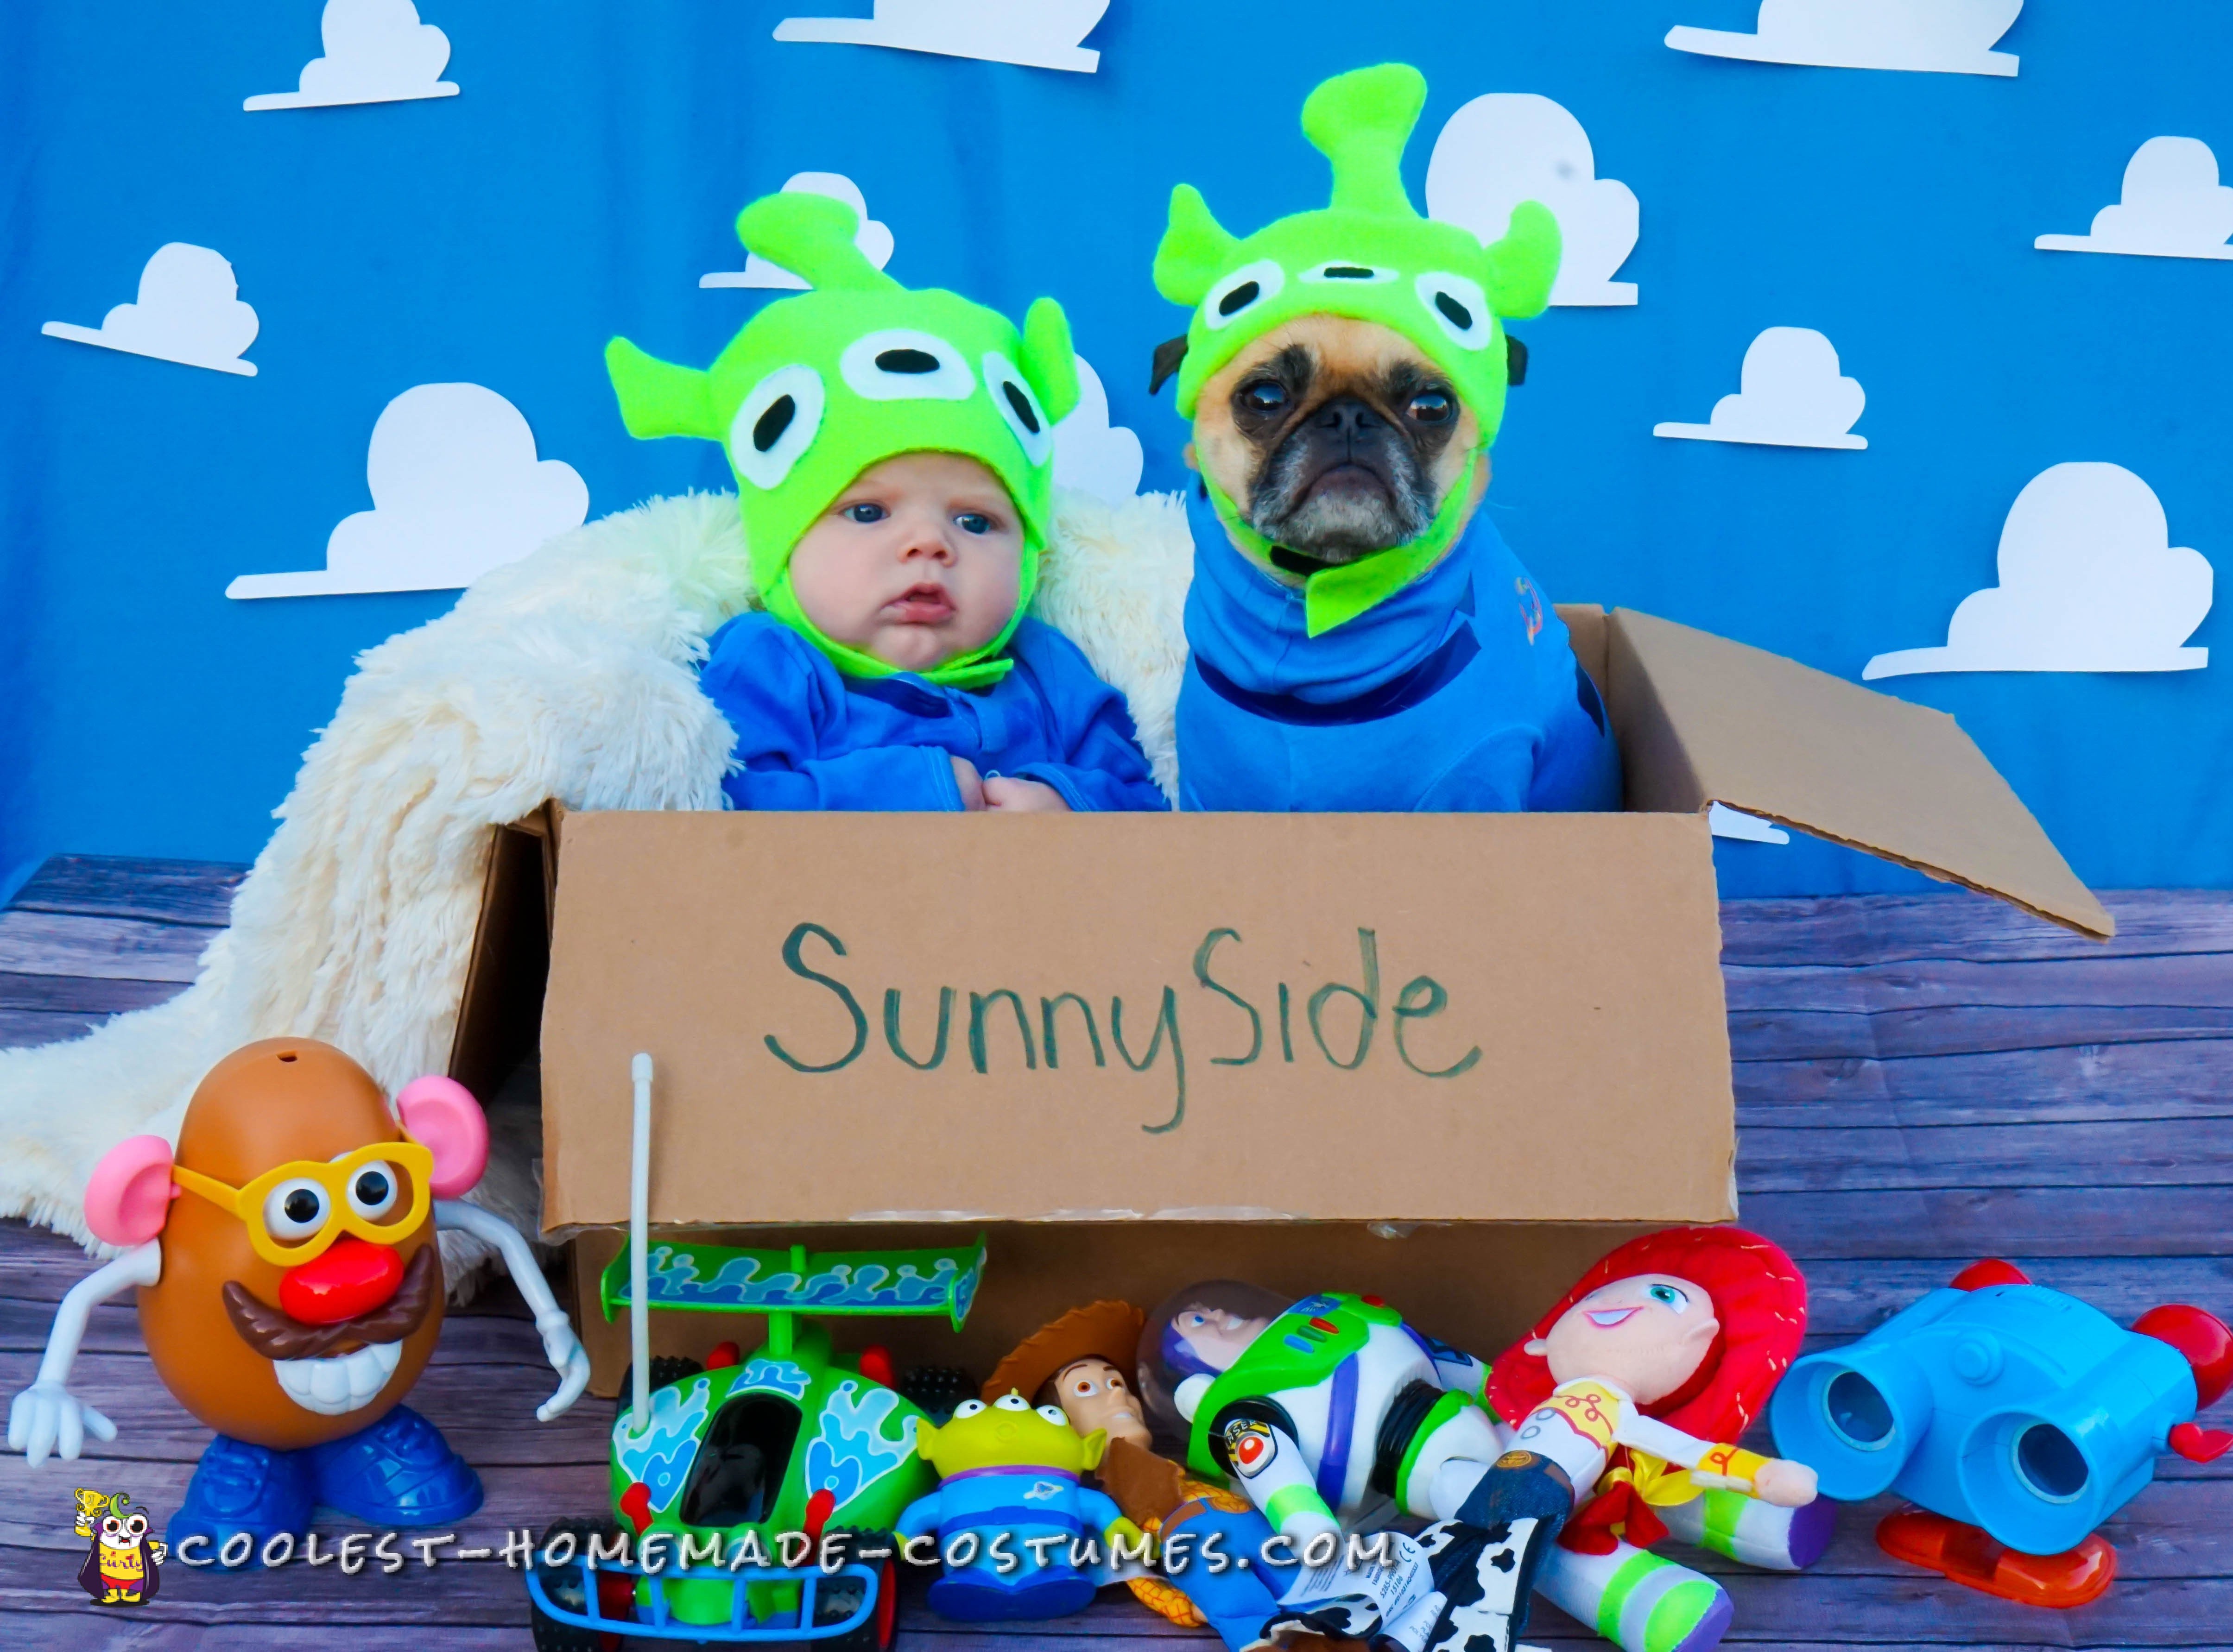 Adorable Toy Story Green Alien Costumes